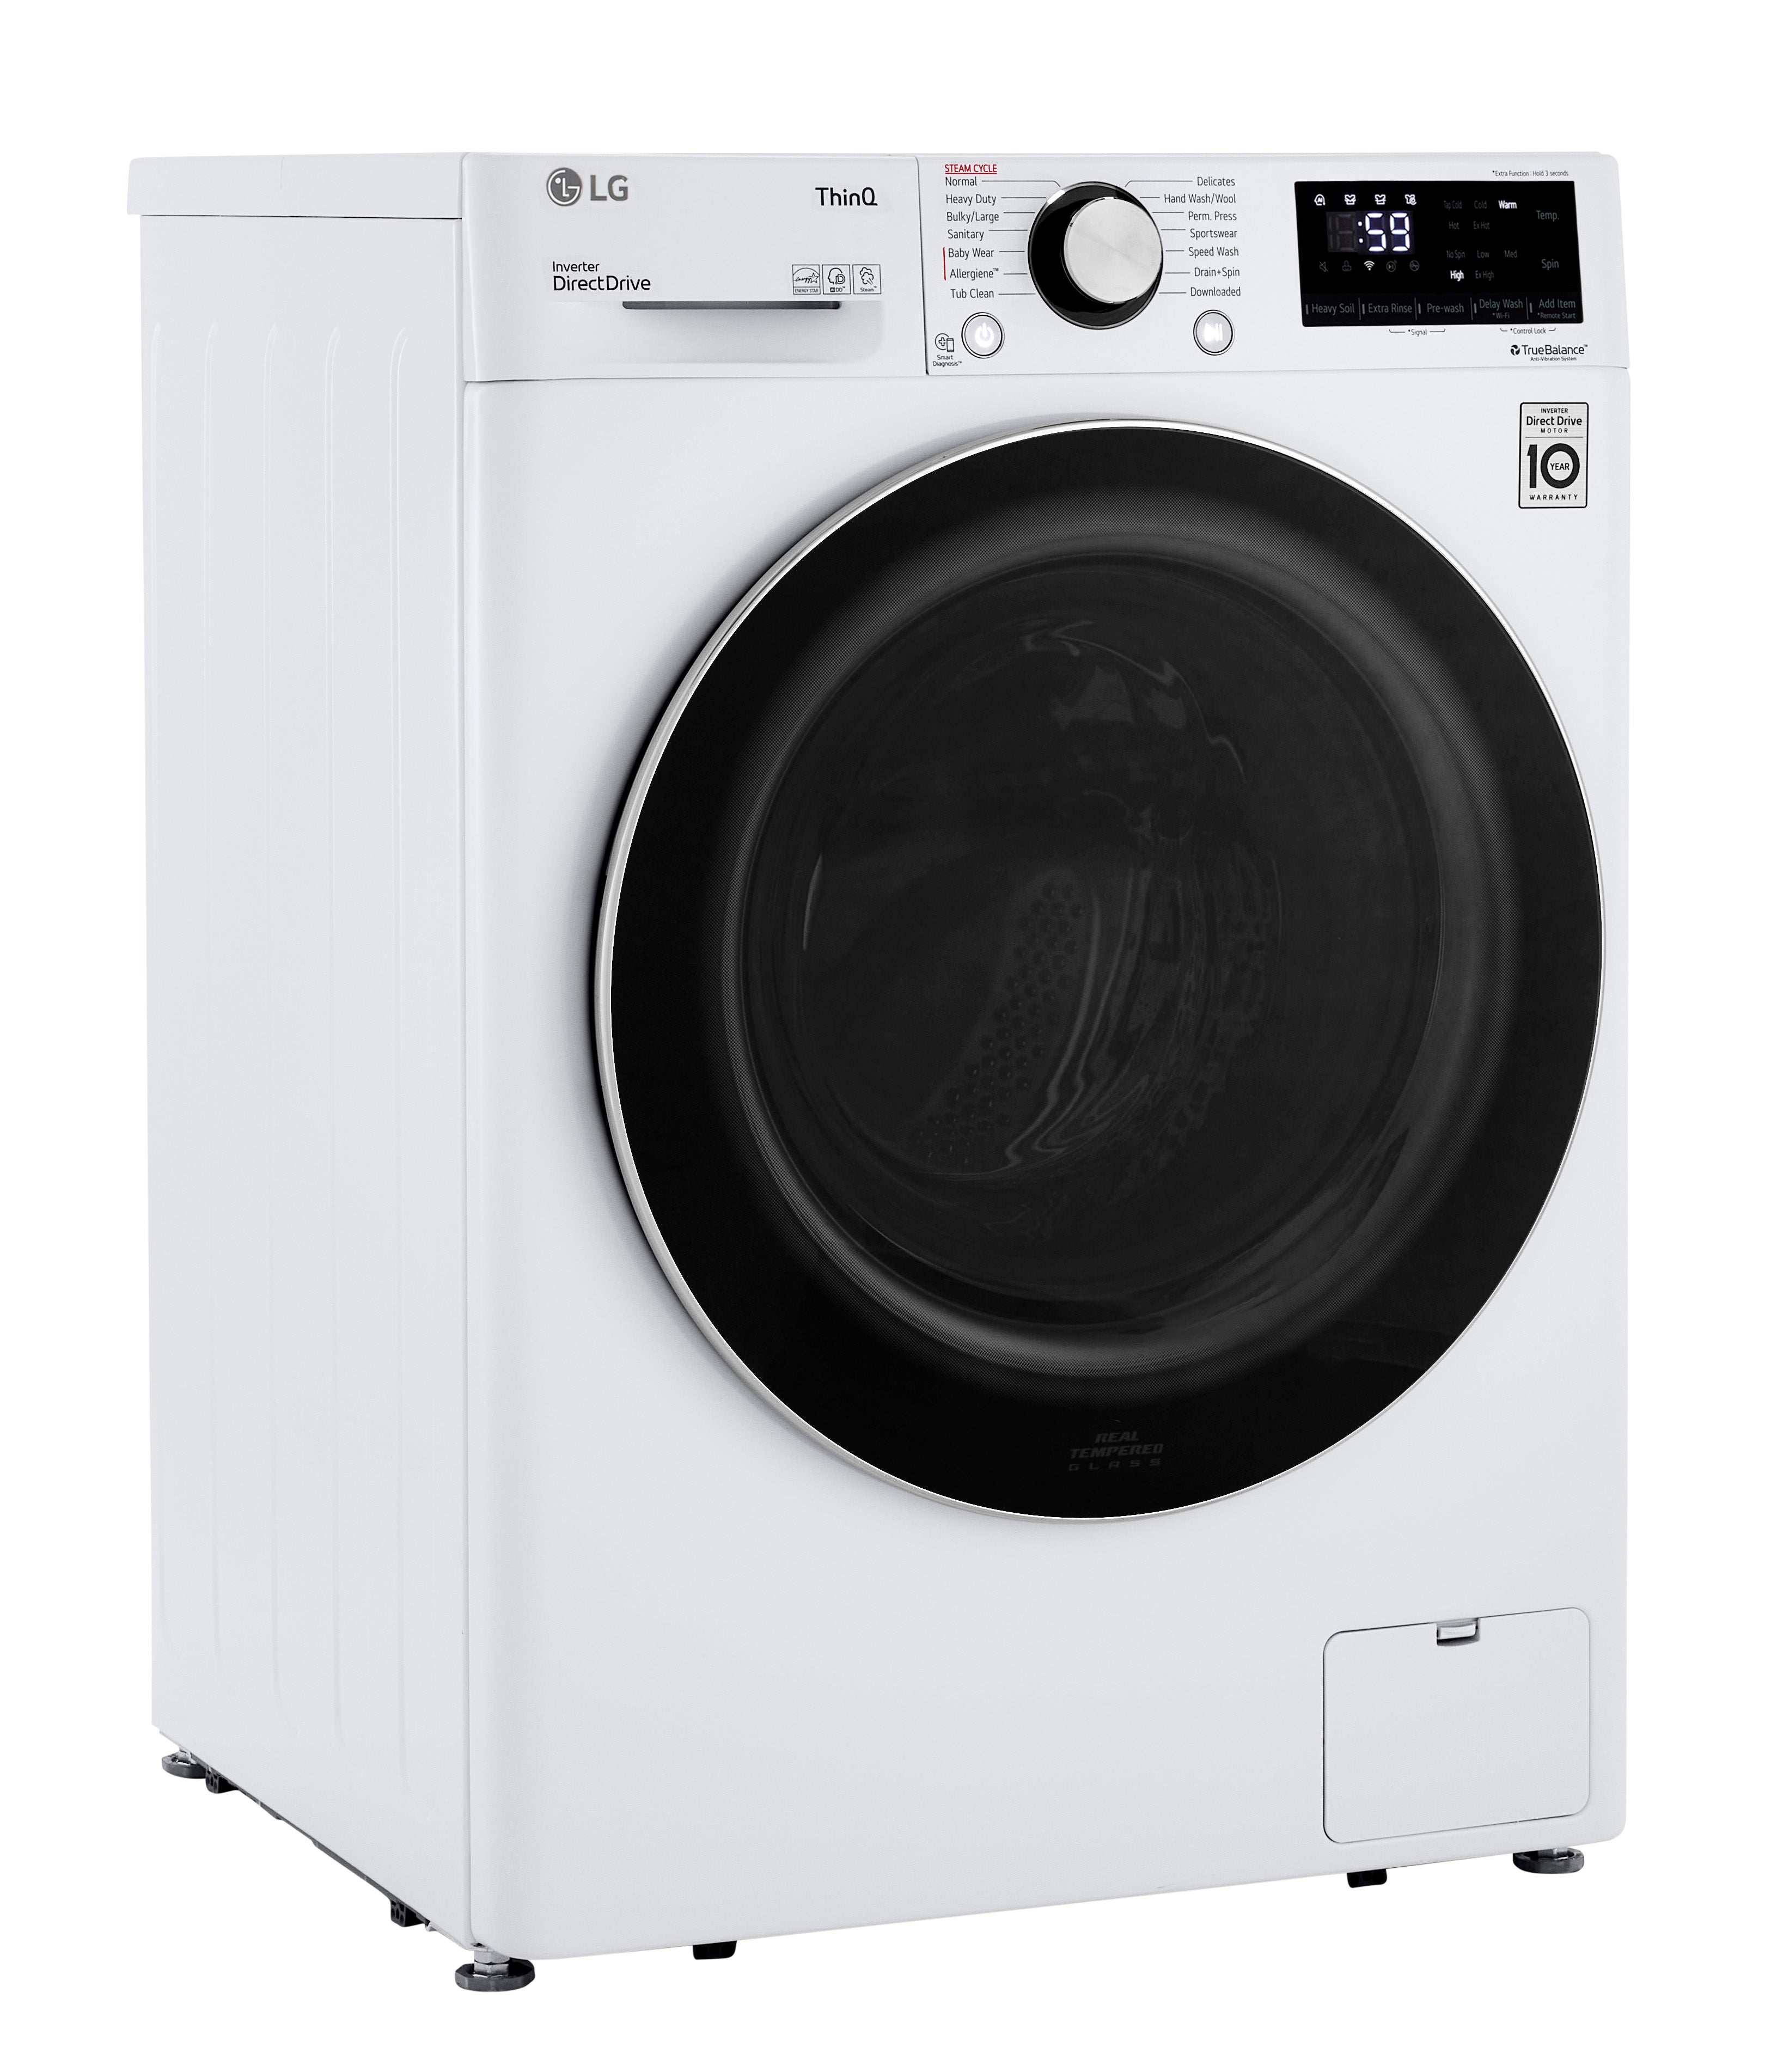 LG - 2.4 cu. Ft  Compact Washer in White - WM1455HWA